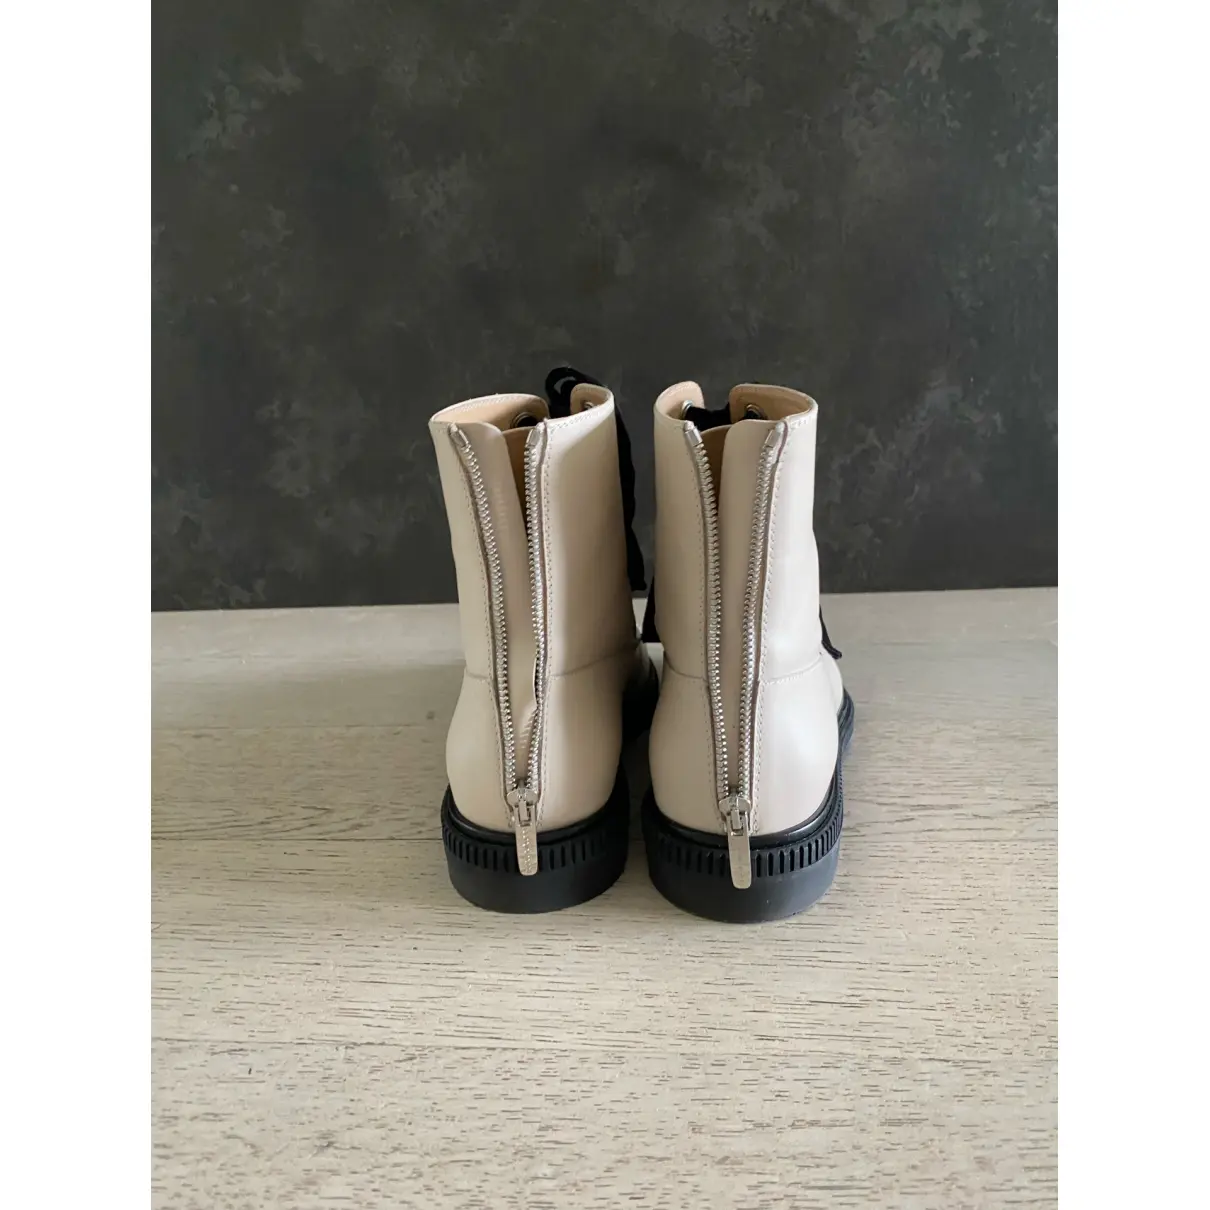 Luxury Sergio Rossi Ankle boots Women